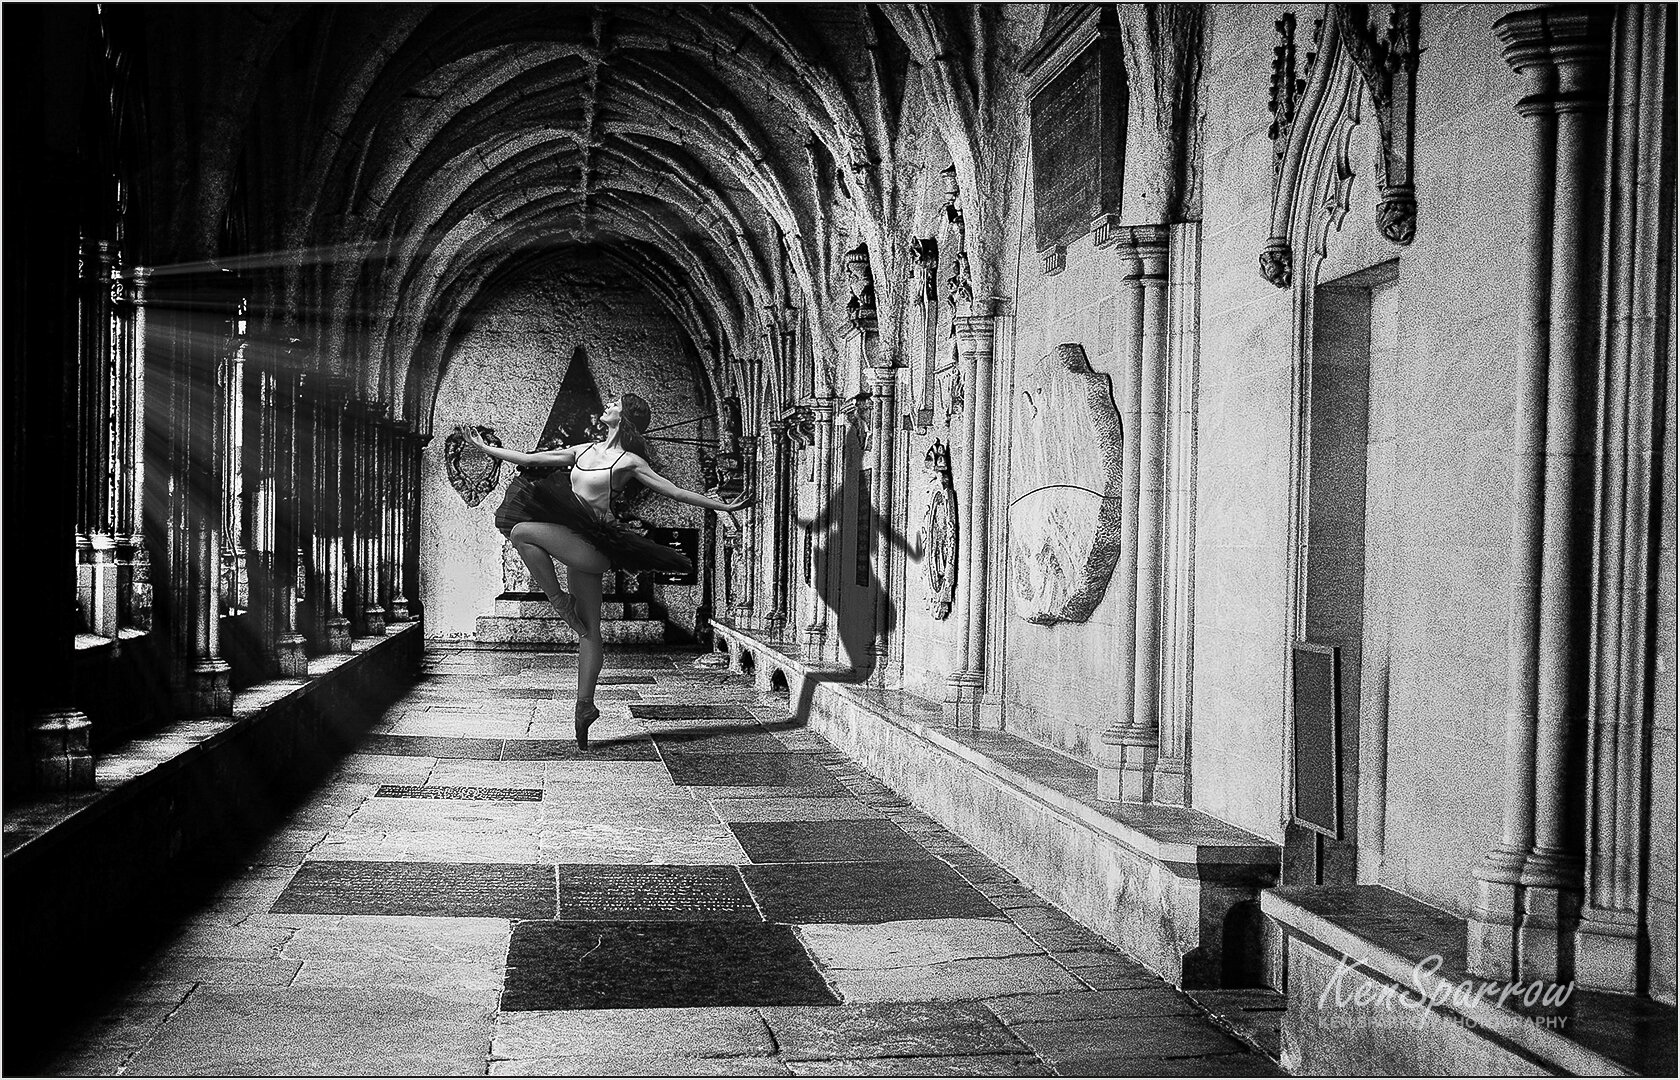 02 Dancer in the Cloister